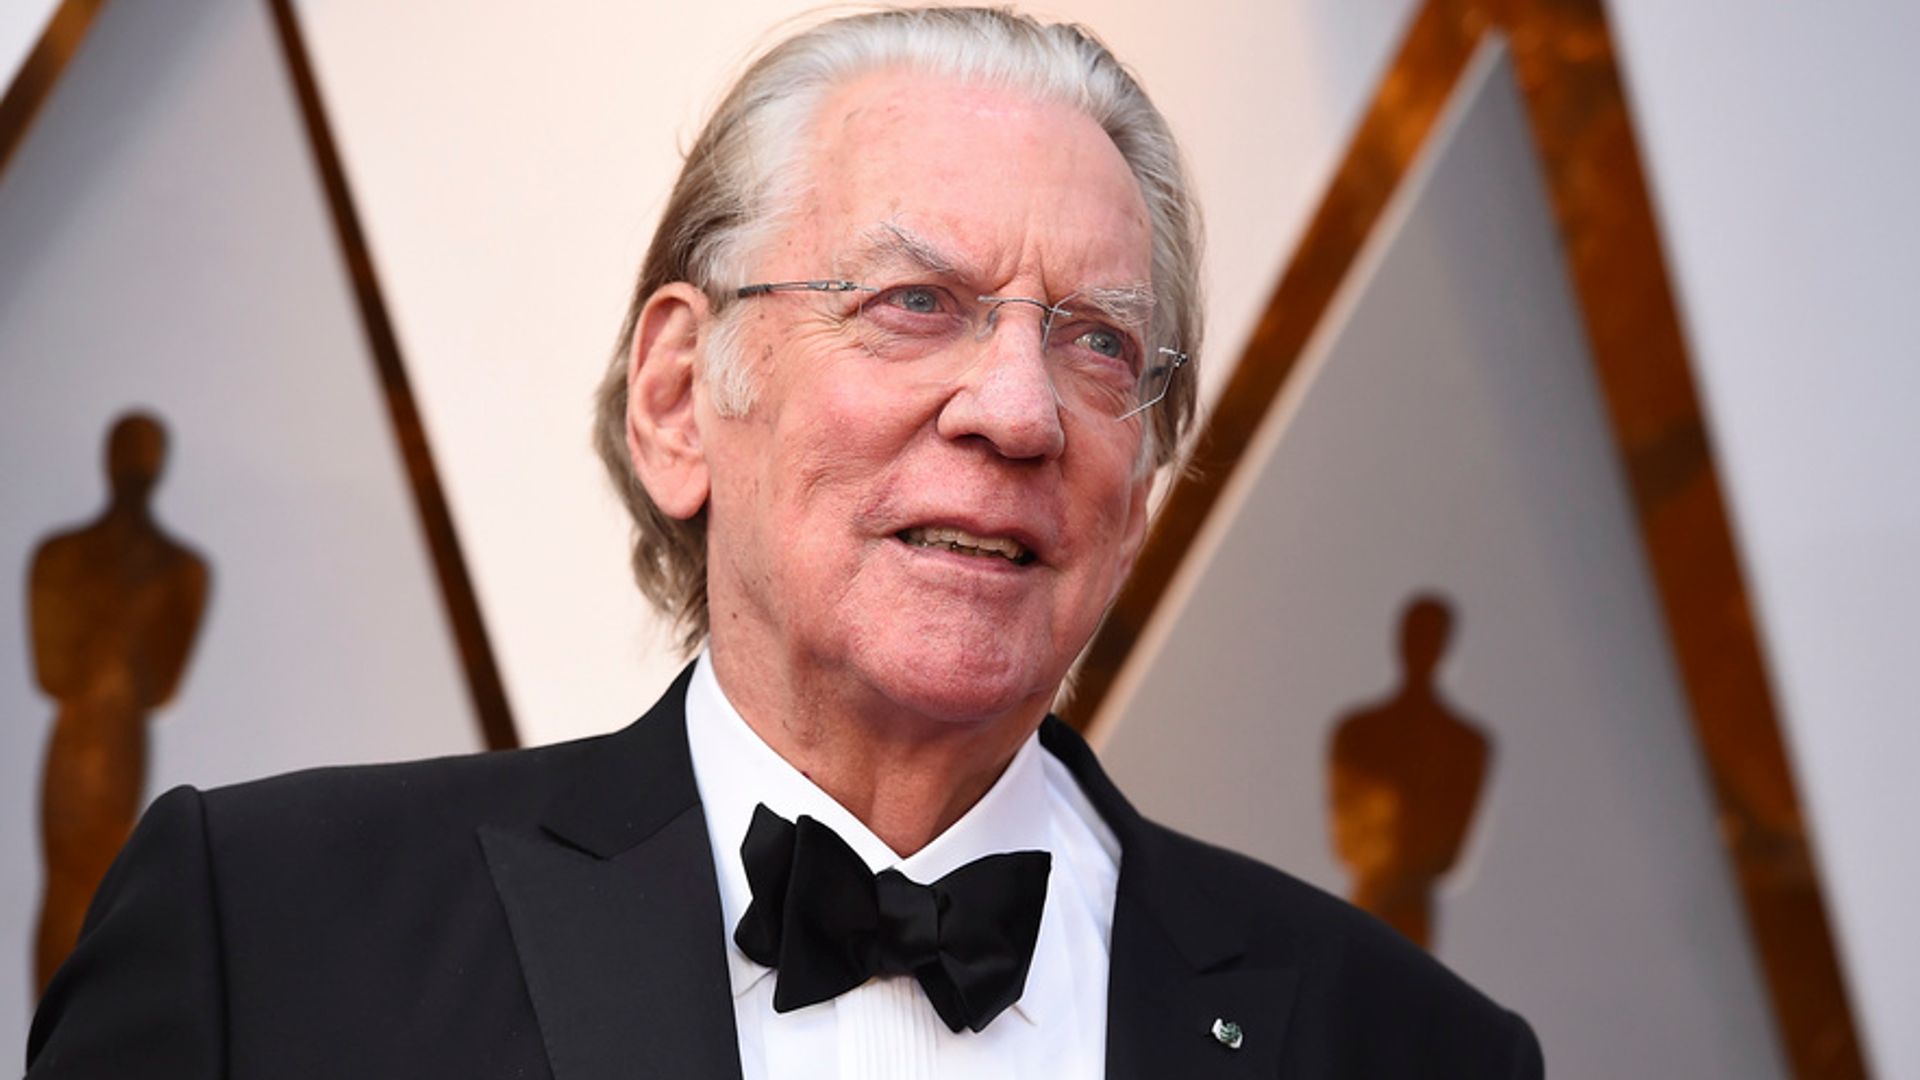 Hollywood legend Donald Sutherland has died